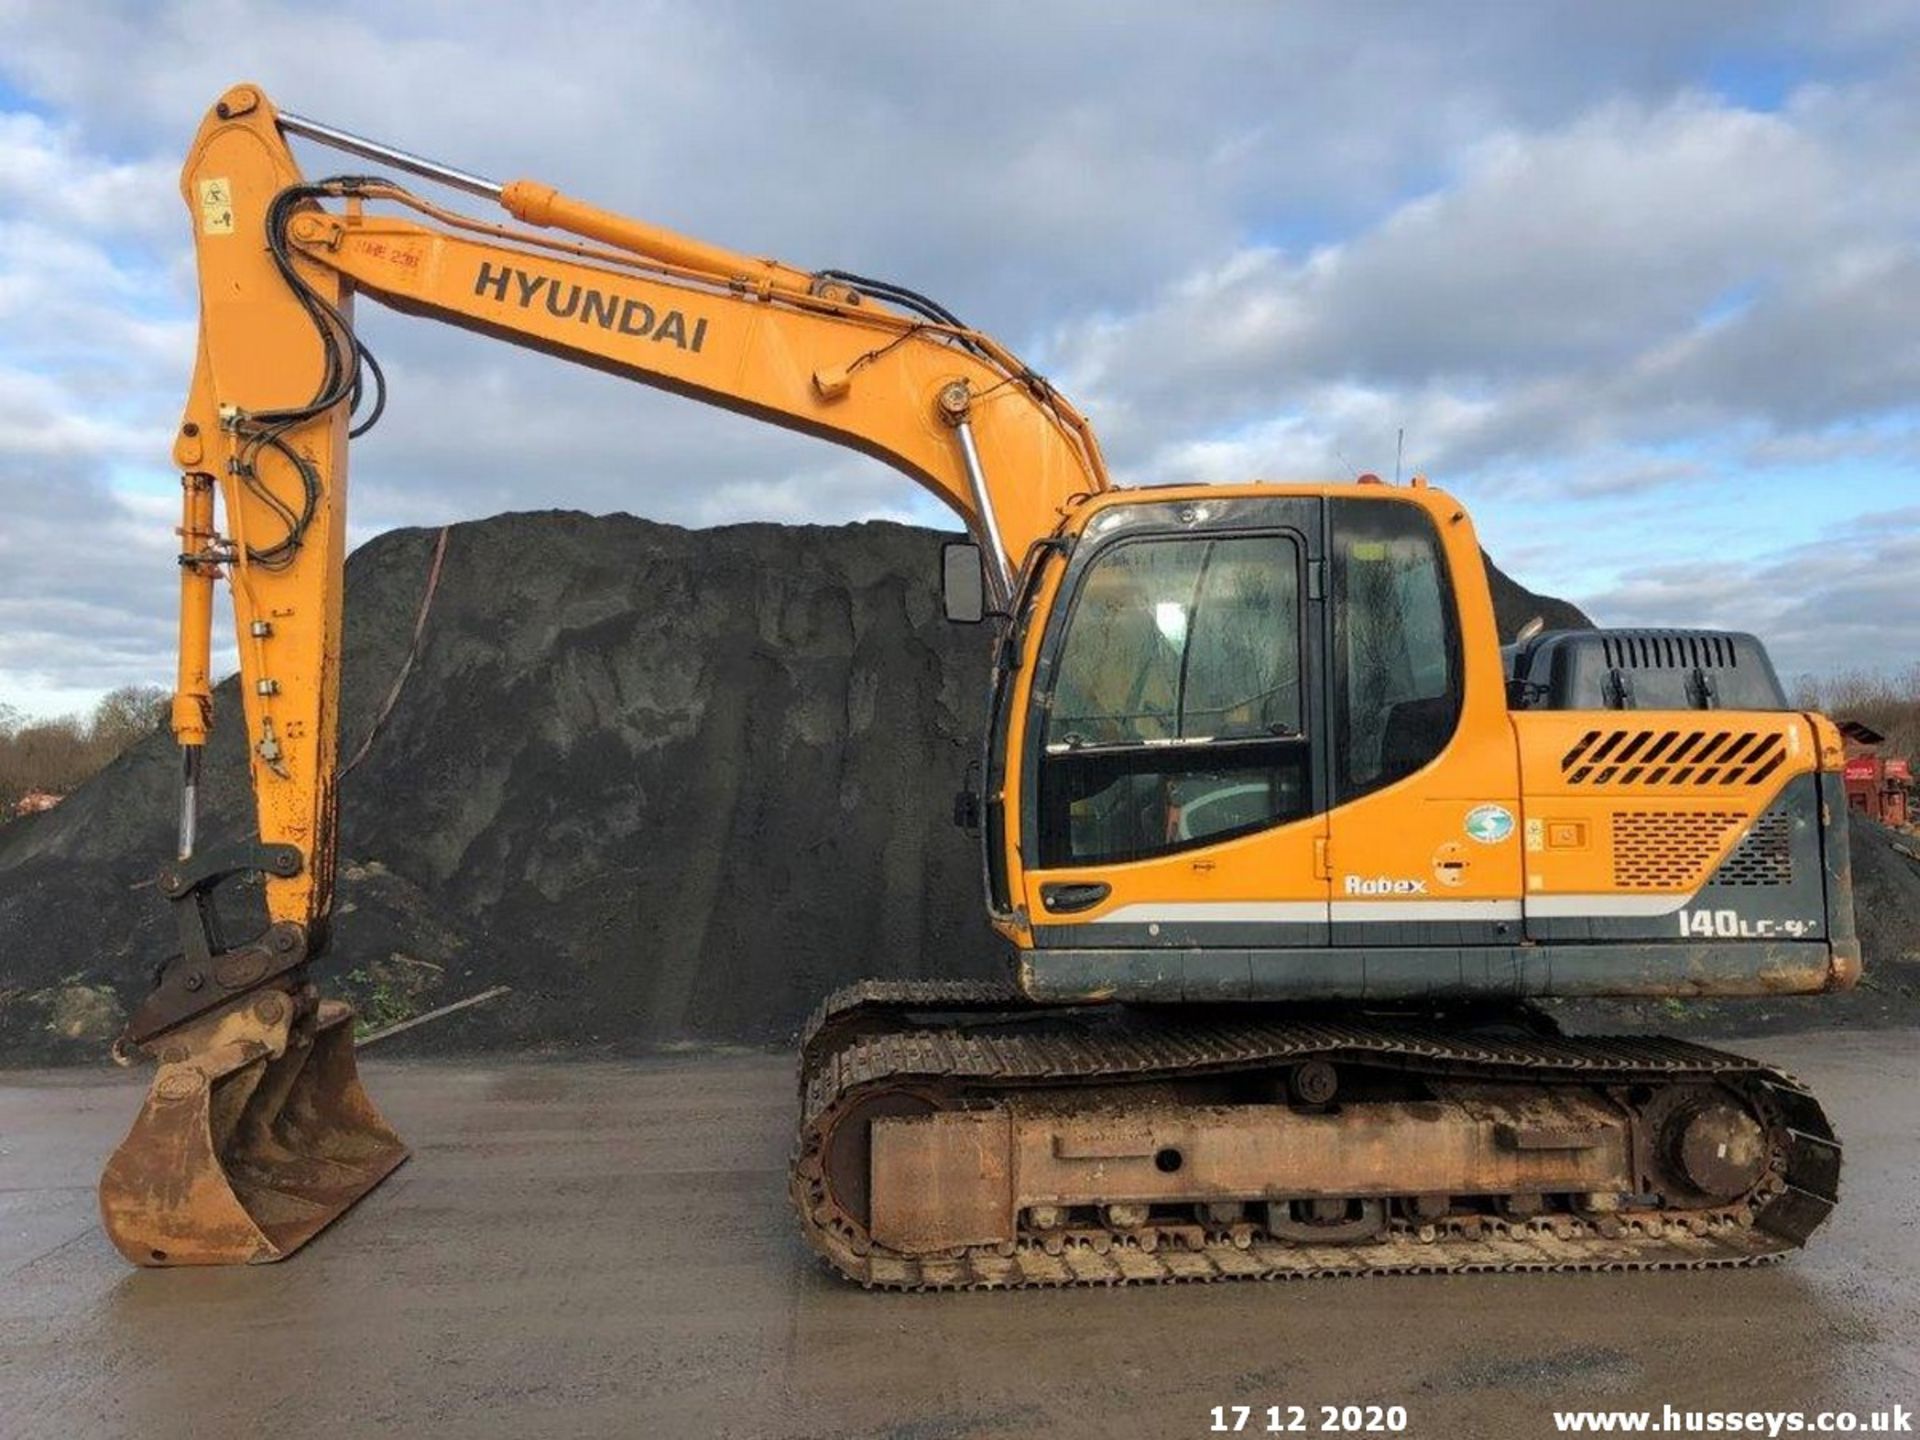 HYUNDAI ROBEX 140 LC-9A EXCAVATOR 2014 5507HRS C.W HAMMER CIRCUIT, HYDRAULIC HITCH & 2 BUCKETS - Image 2 of 19